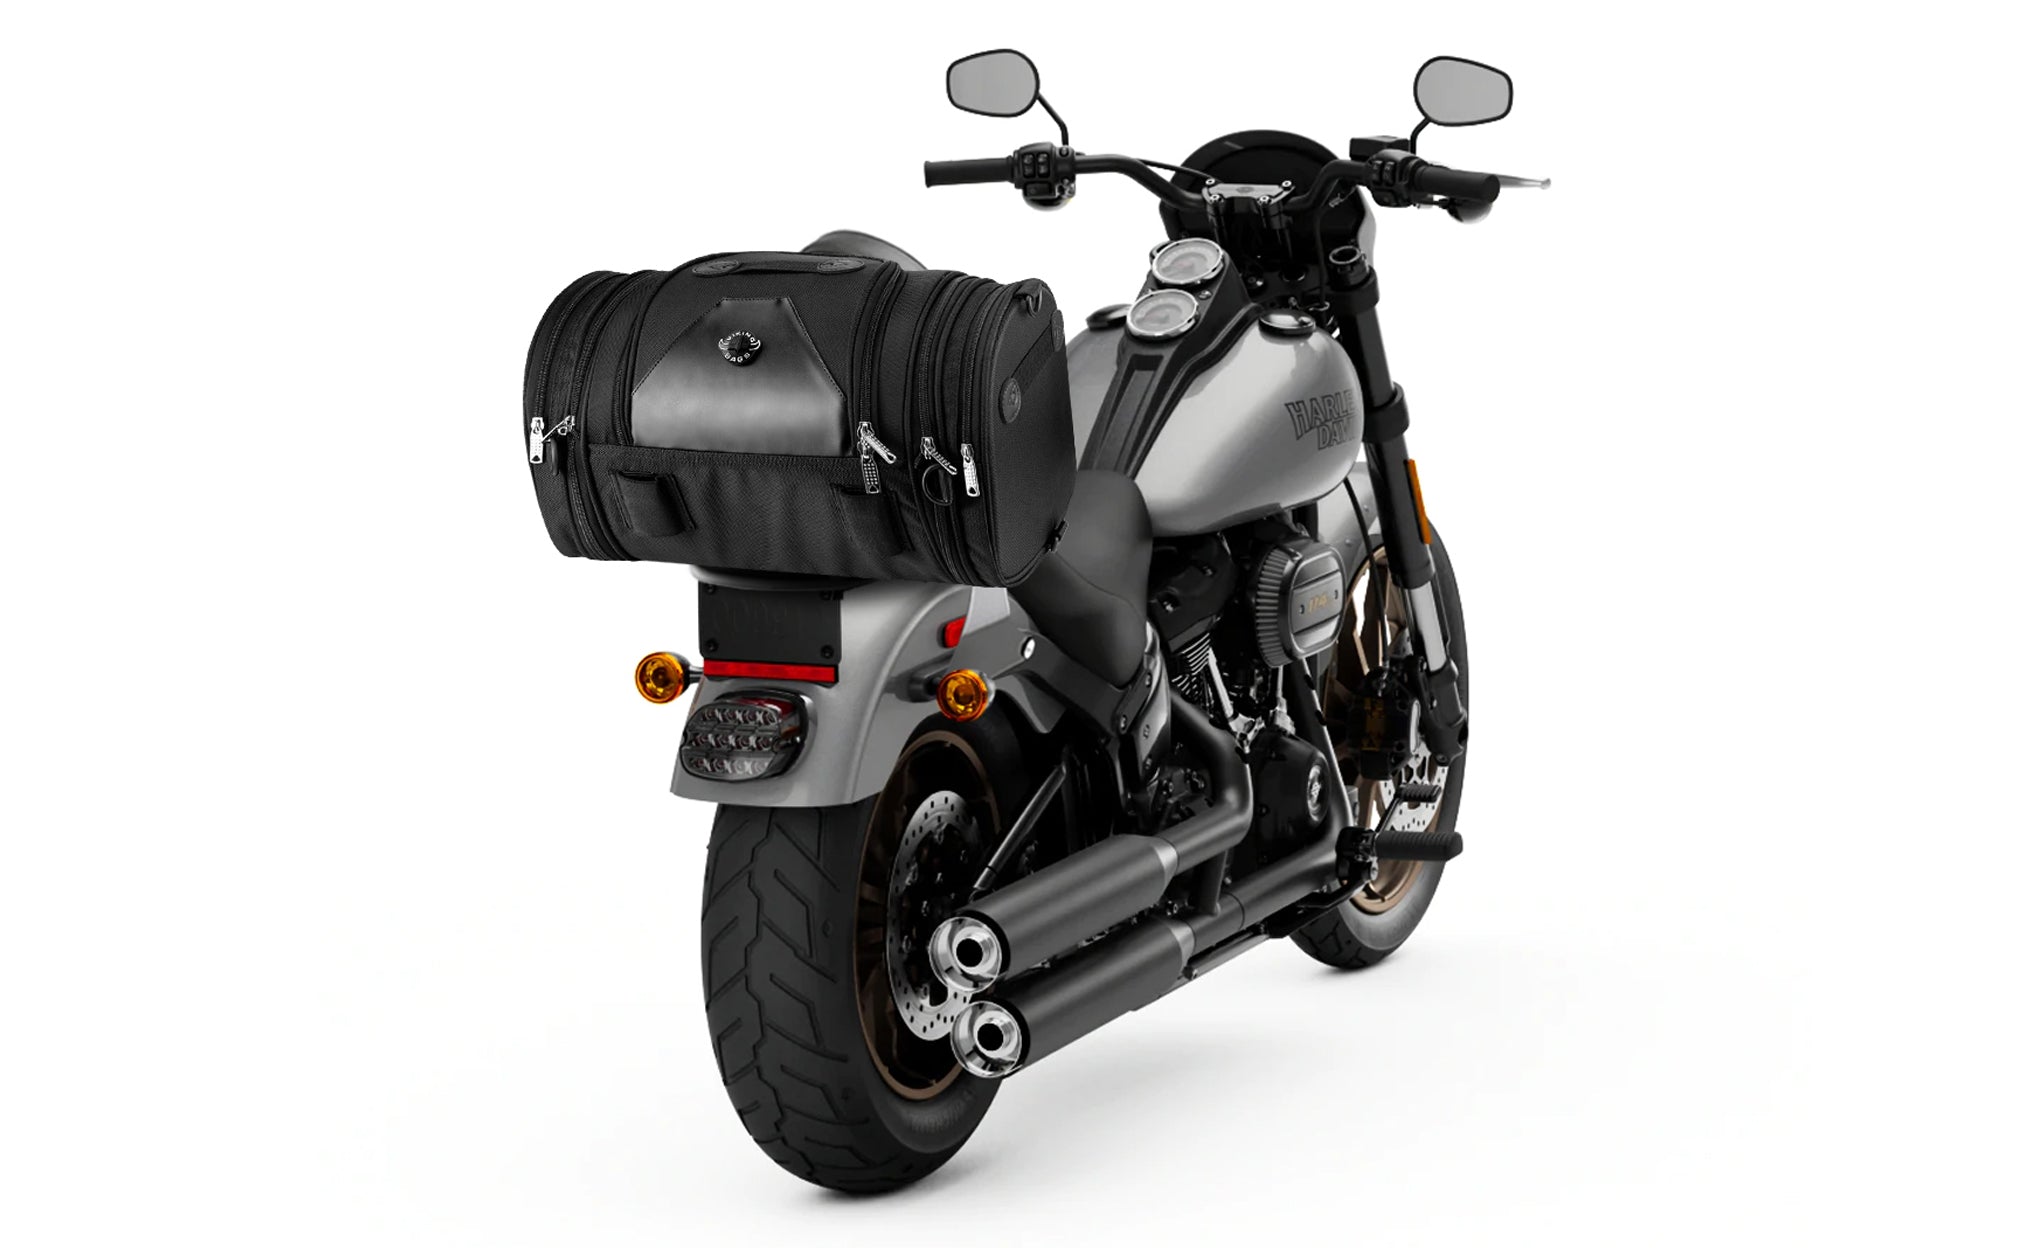 Viking Axwell Small Hysoung Motorcycle Roll Bag Bag on Bike View @expand